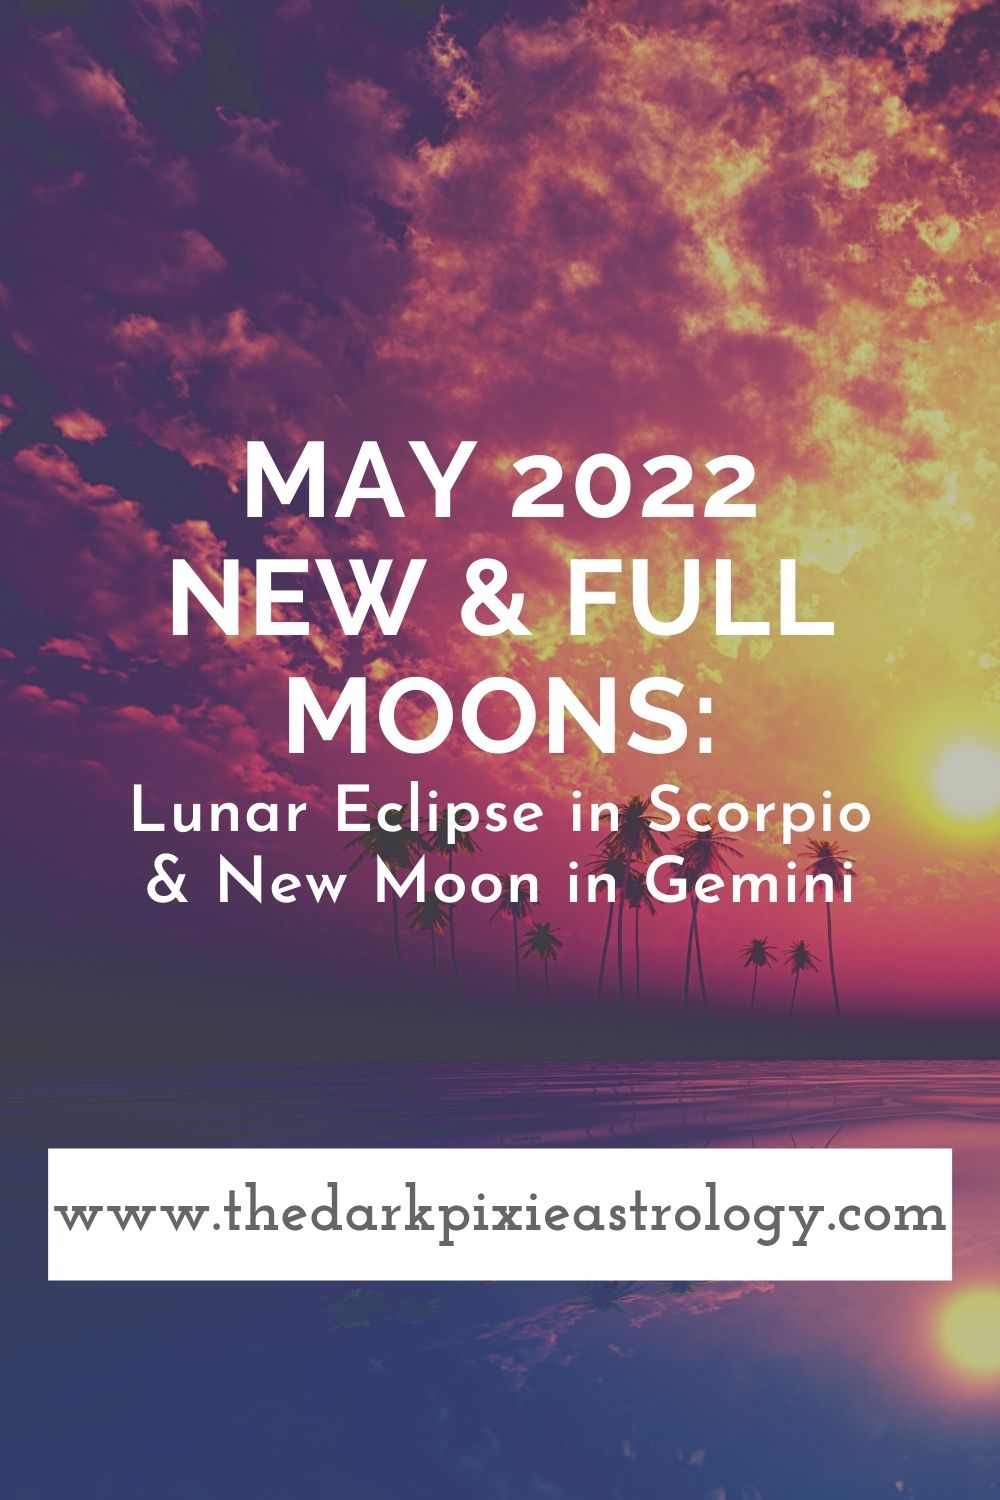 May 2022 New & Full Moons Lunar Eclipse in Scorpio & New Moon in